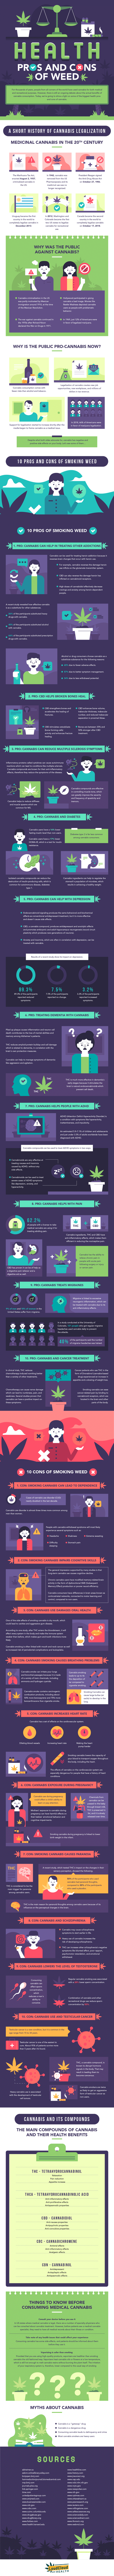 Pros and Cons of Weed Infographic 2021